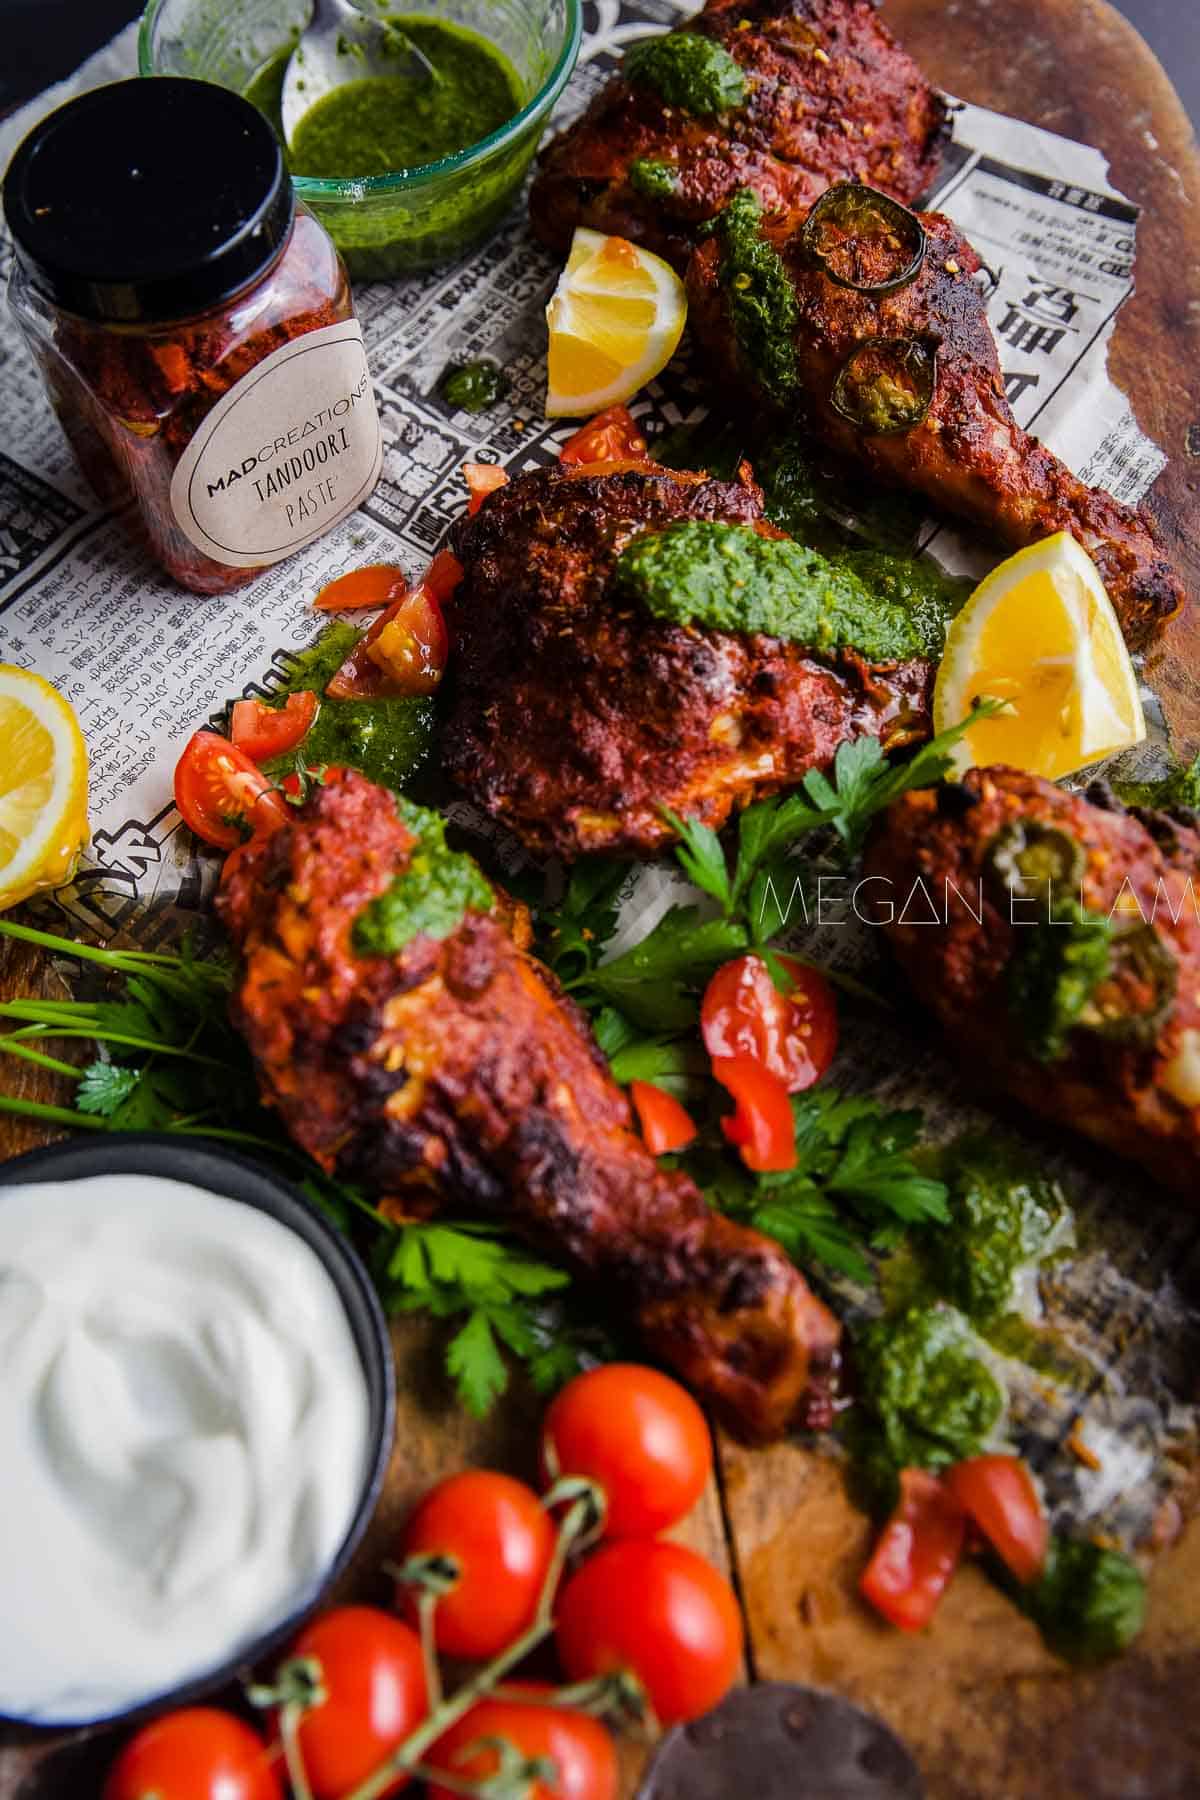 Pieces of chicken with herbs and lemon.